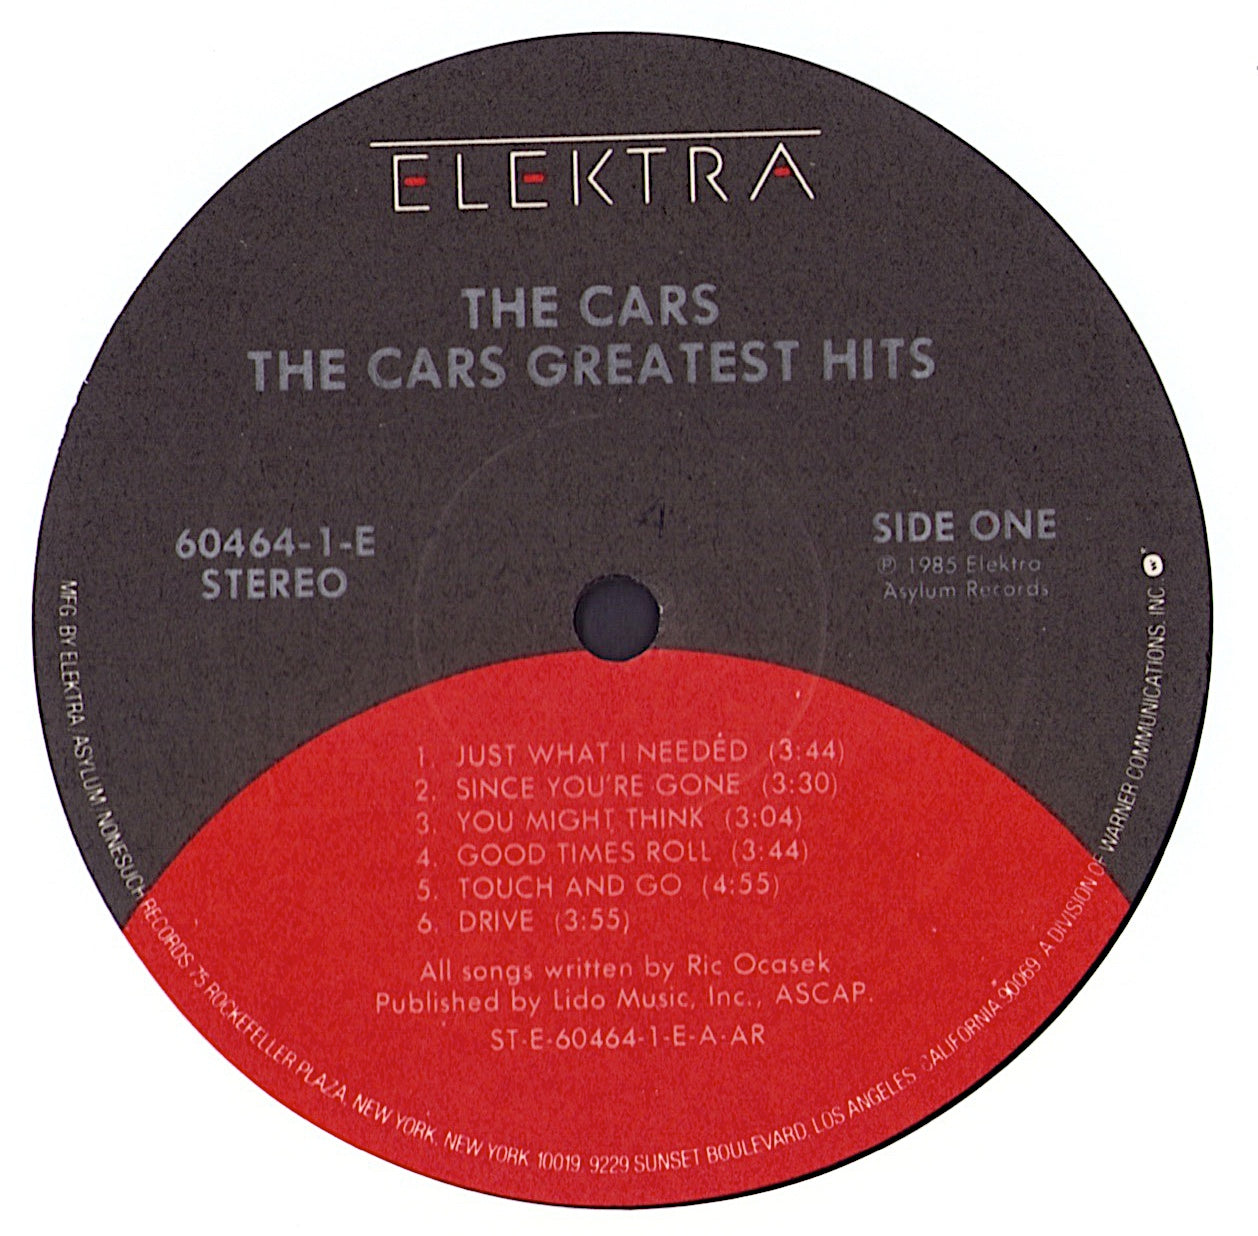 The Cars – The Cars Greatest Hits Vinyl LP